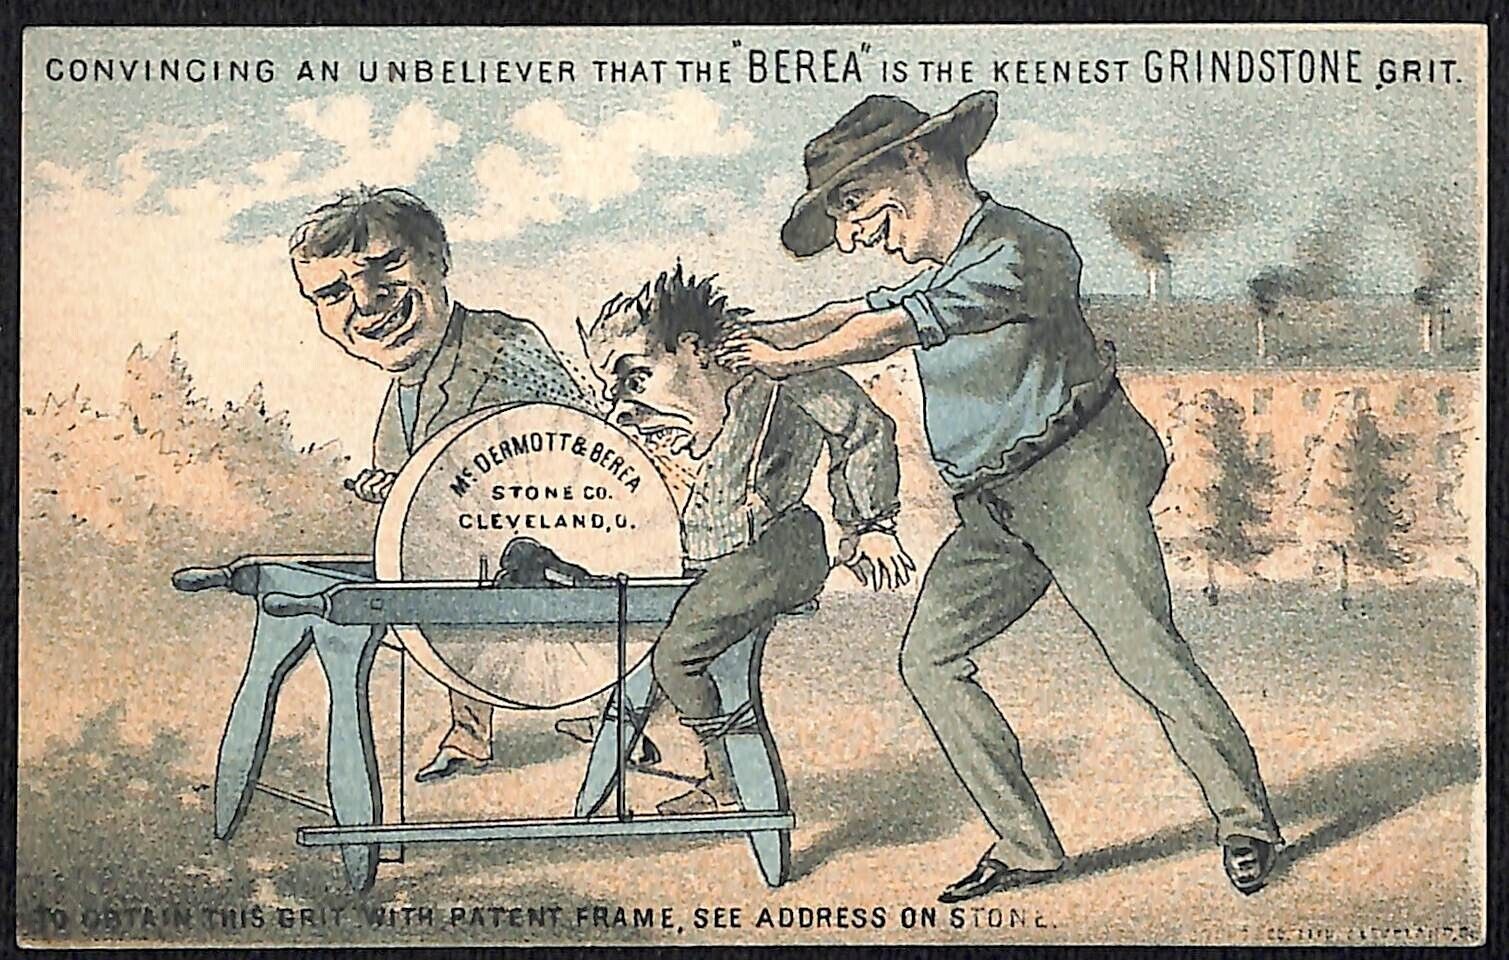 McDermott & Berea Grindstone Victorian Trade Card - Gruesome Use of Product